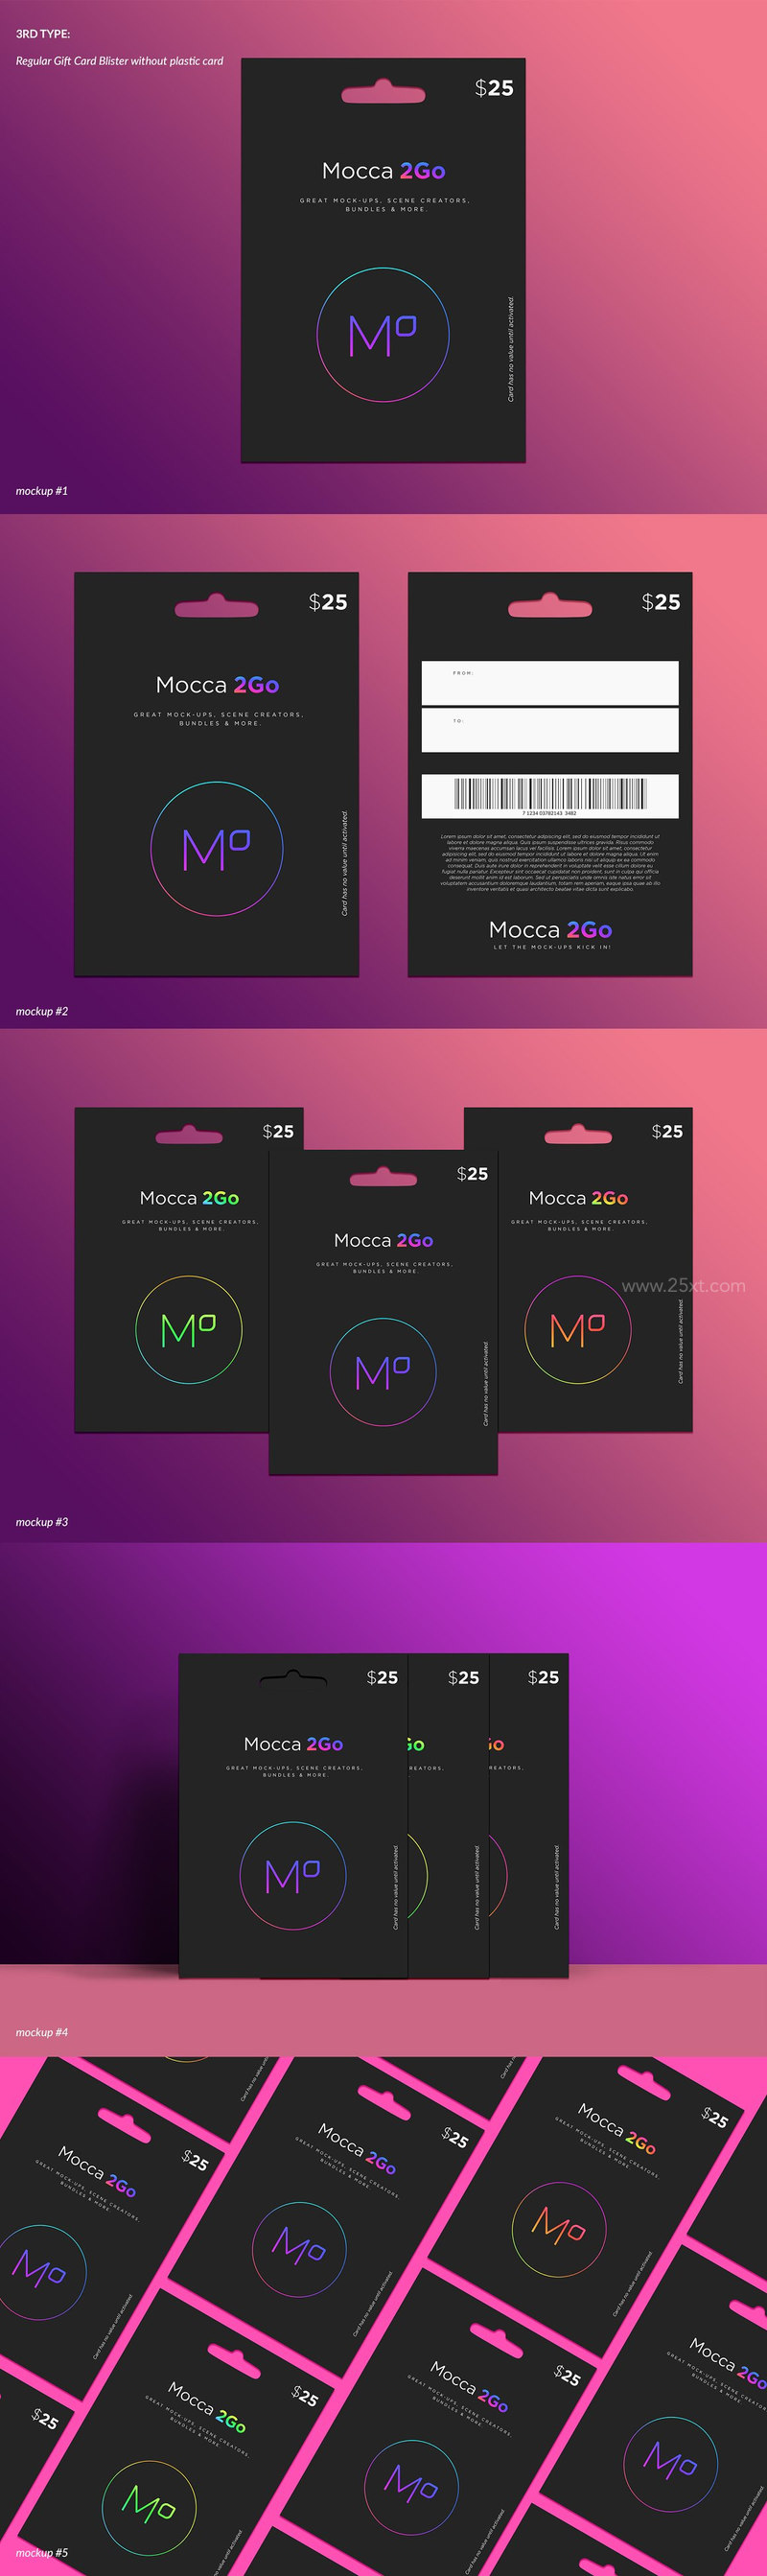 25xt-485258-Gift Cards 5 Top Types 25xMockups5.jpg